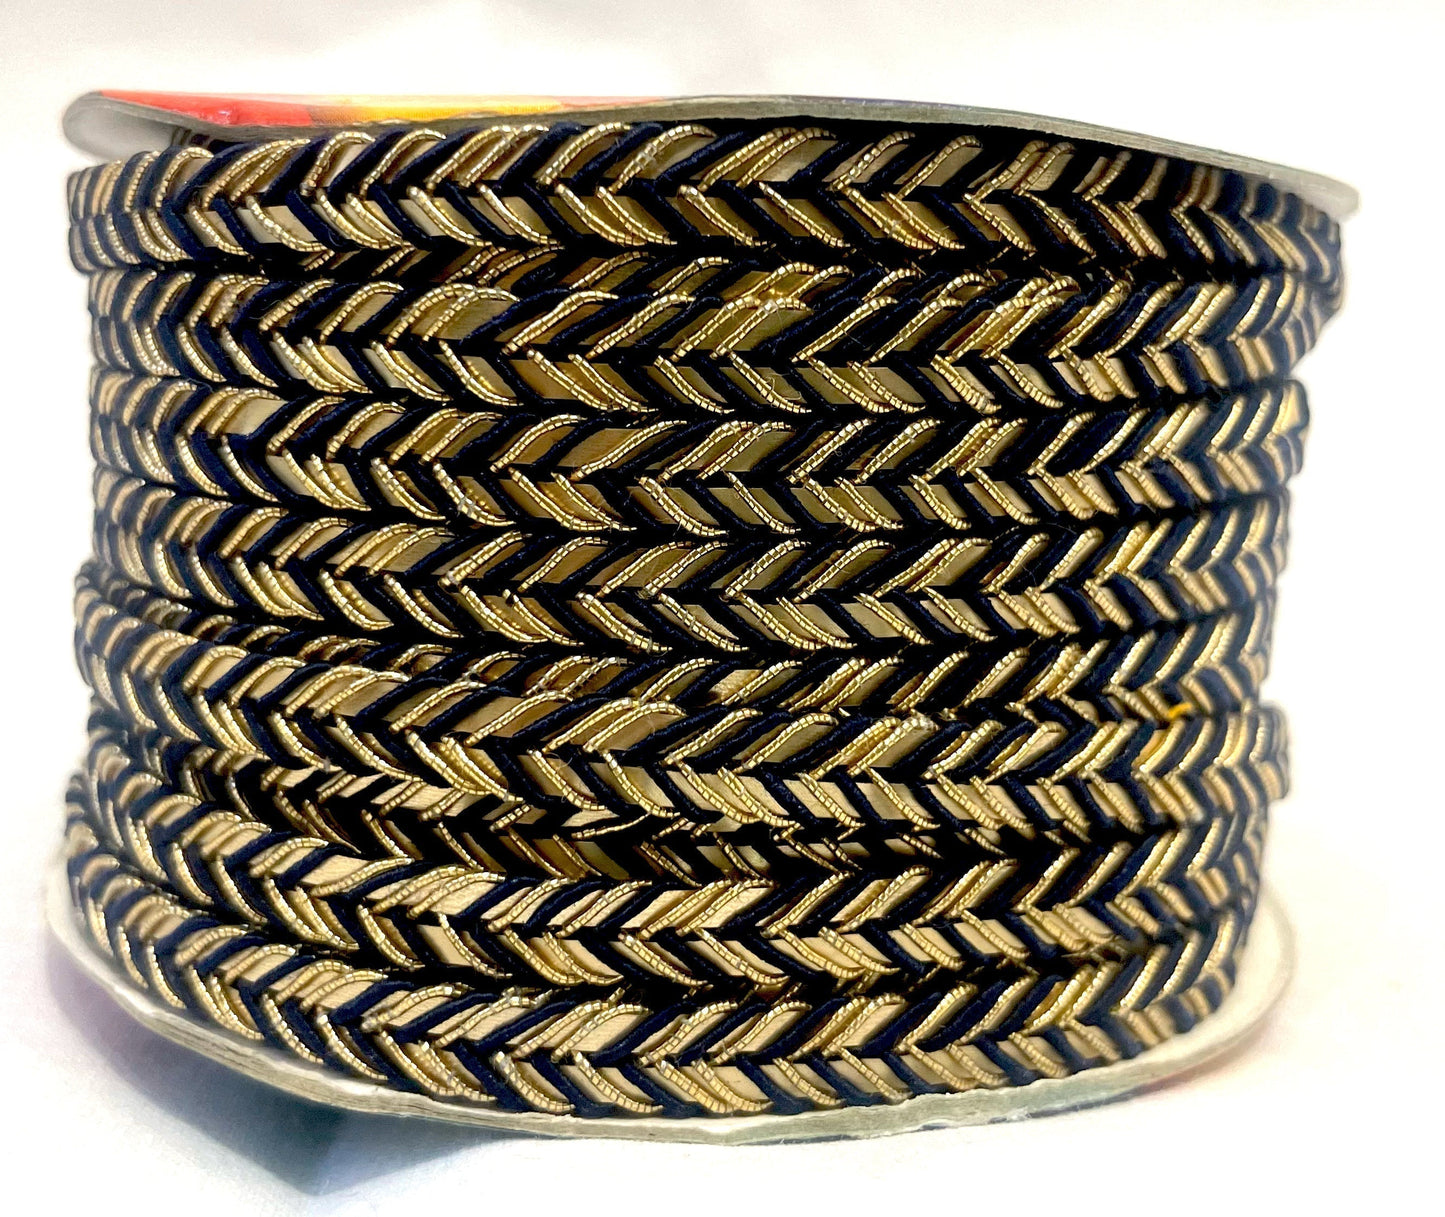 Golden Braid Border, Blue And Golden,  Laces for Dress, Home Décor, Shoe, Bags, Hats, DIY, Handmade, 0.2 inch Broad